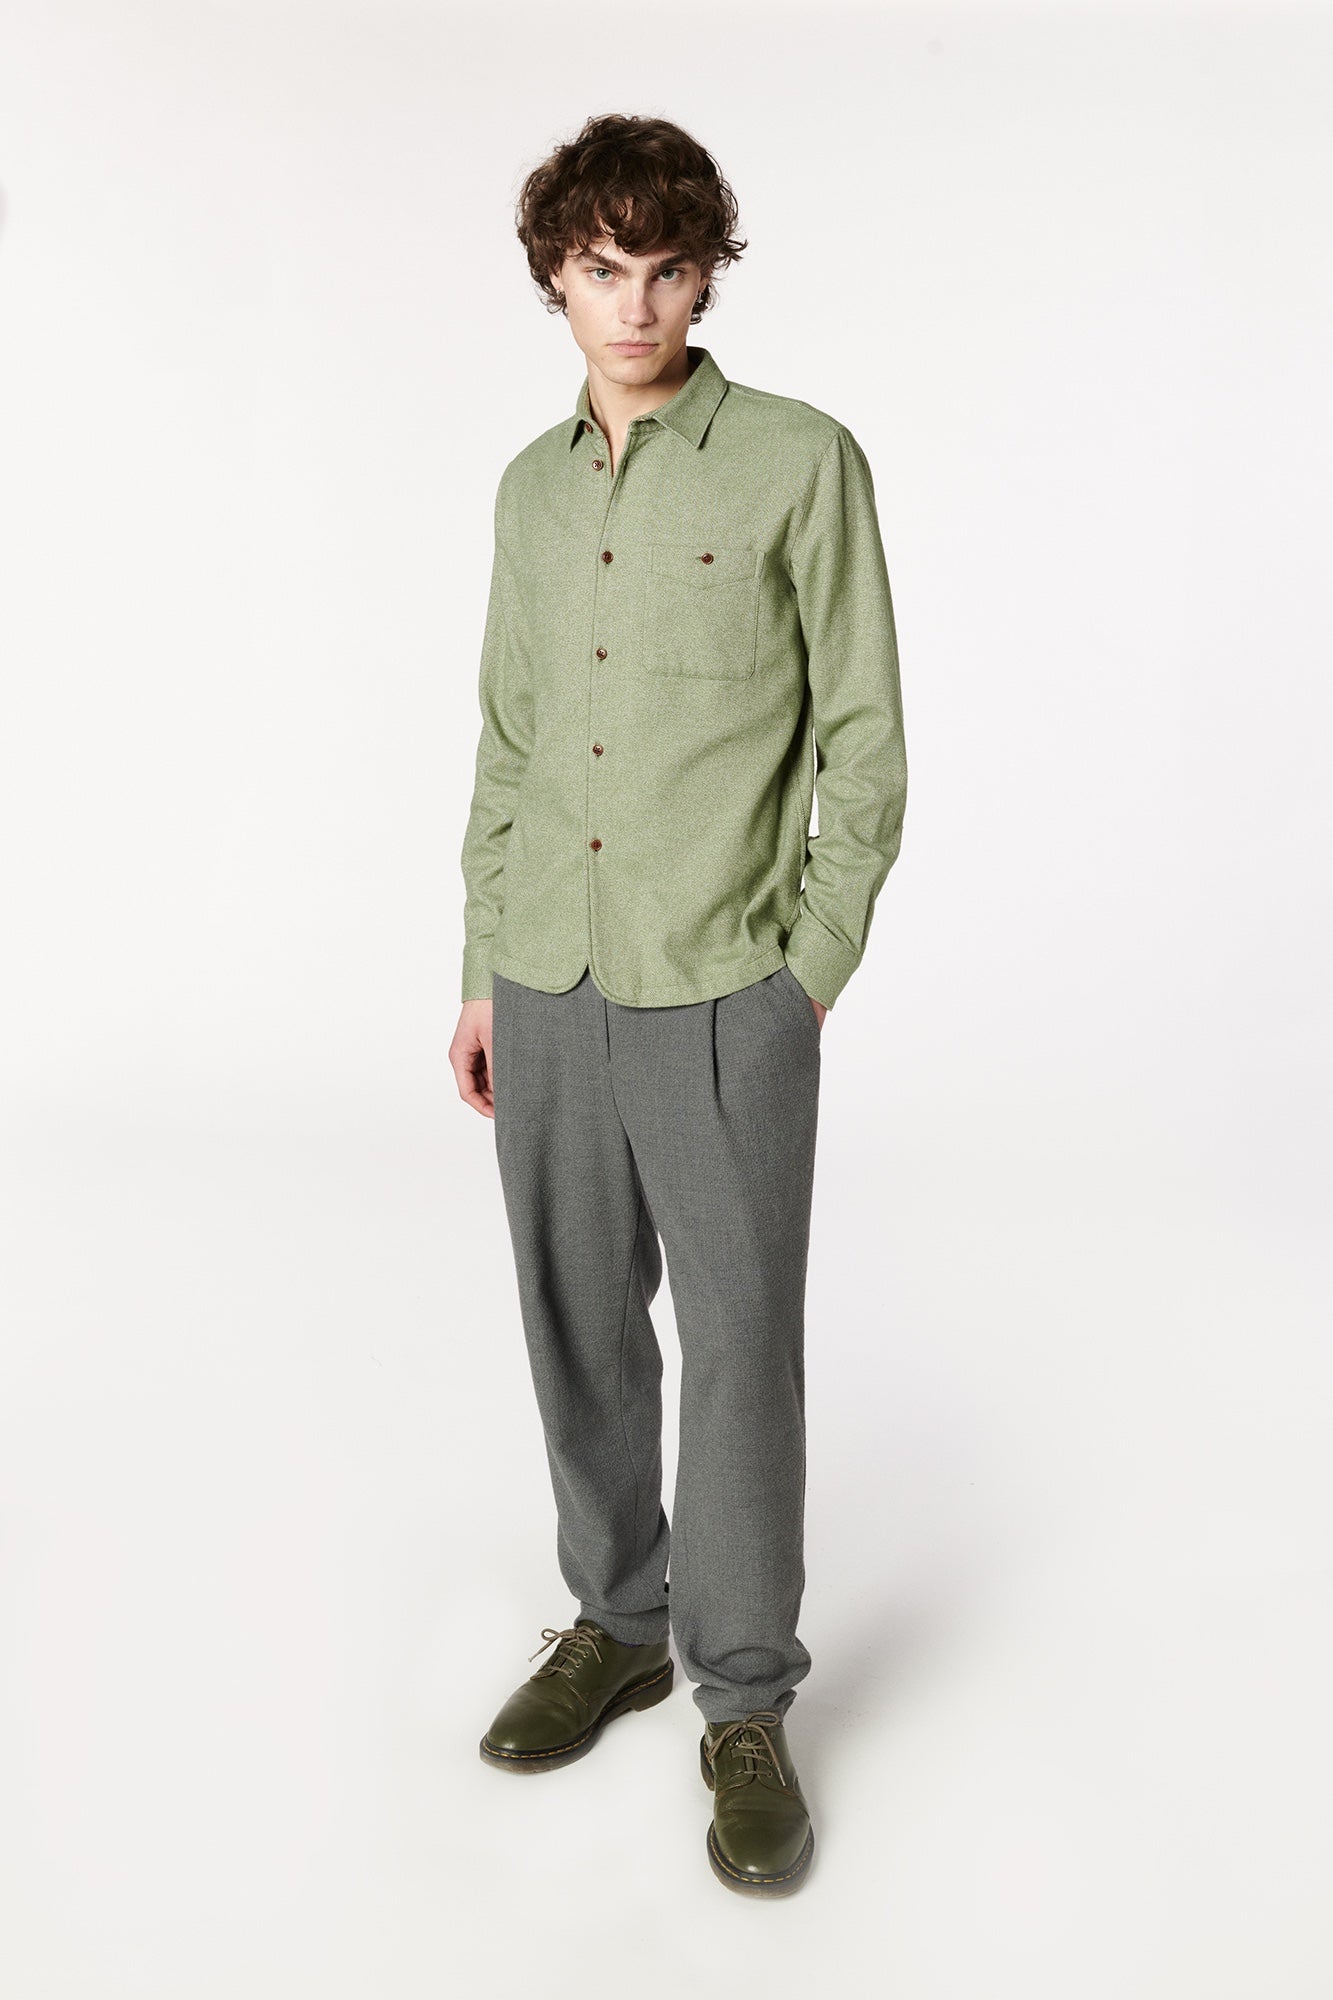 strong-shirt-in-the-finest-portuguese-flannel-in-melange-green-and-beige